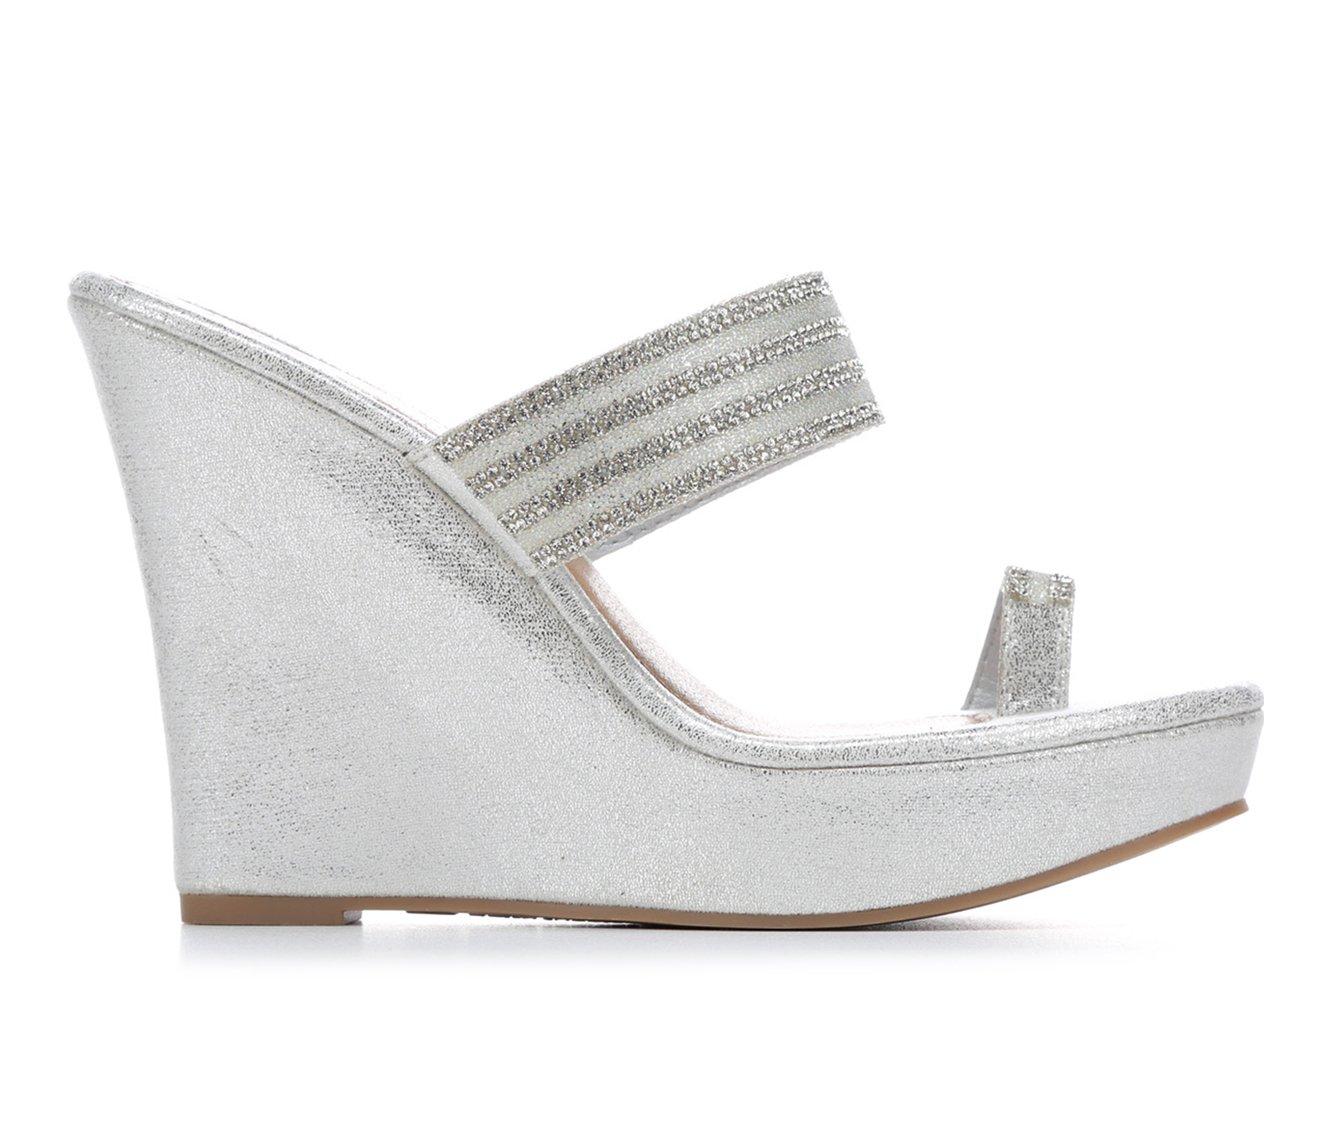 Women's Daisy Fuentes Sonal Special Occasion Shoes